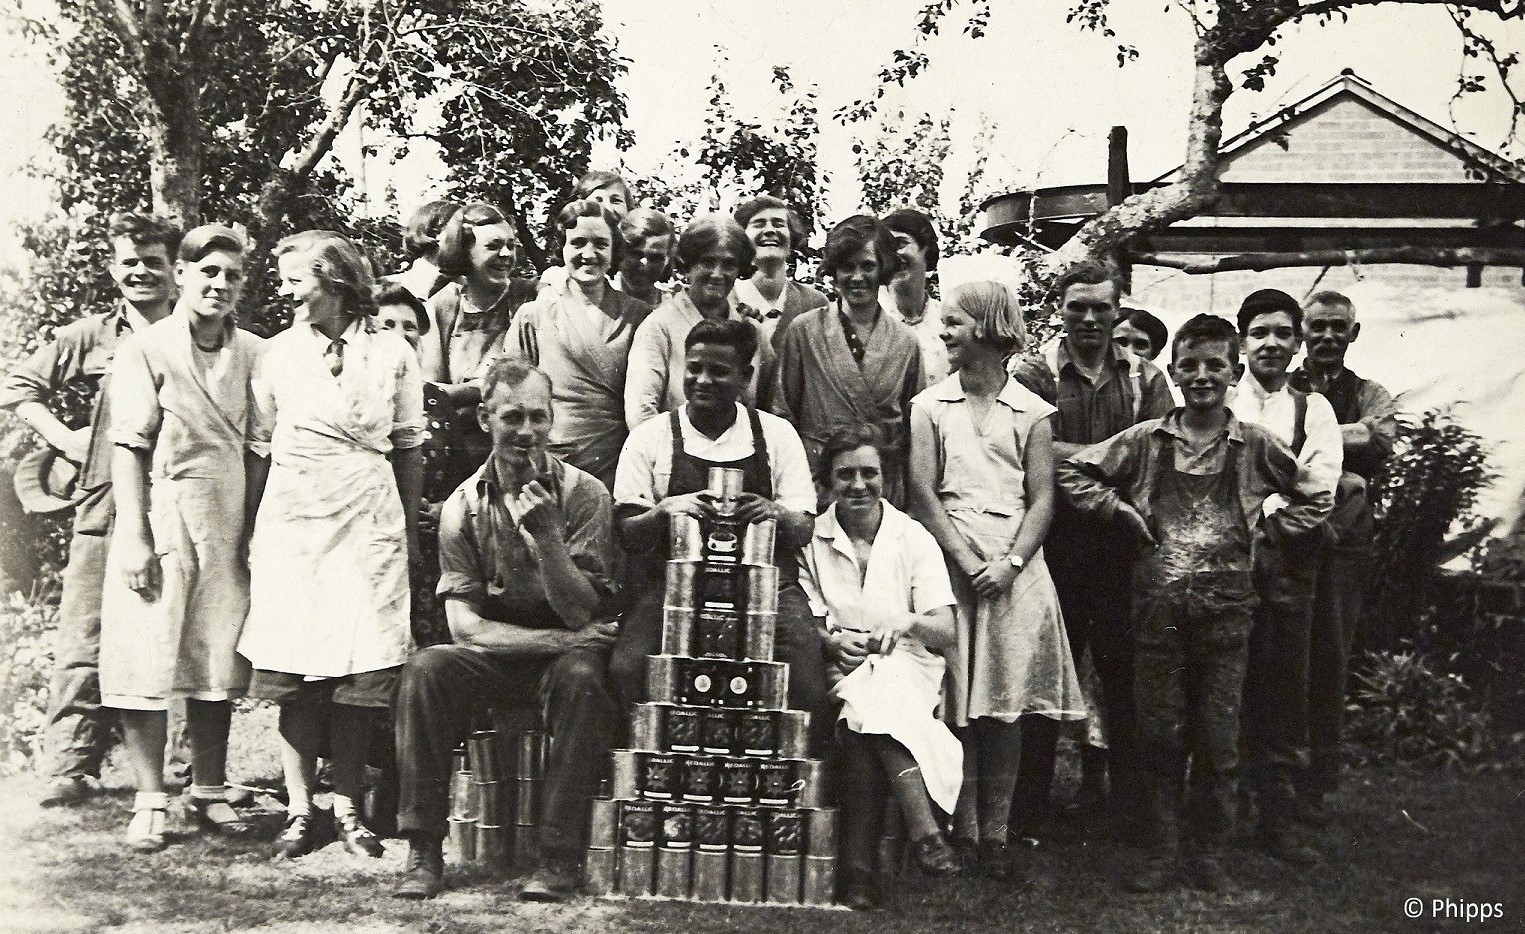 Group of workers with display of canned goods - informal, relaxed shot